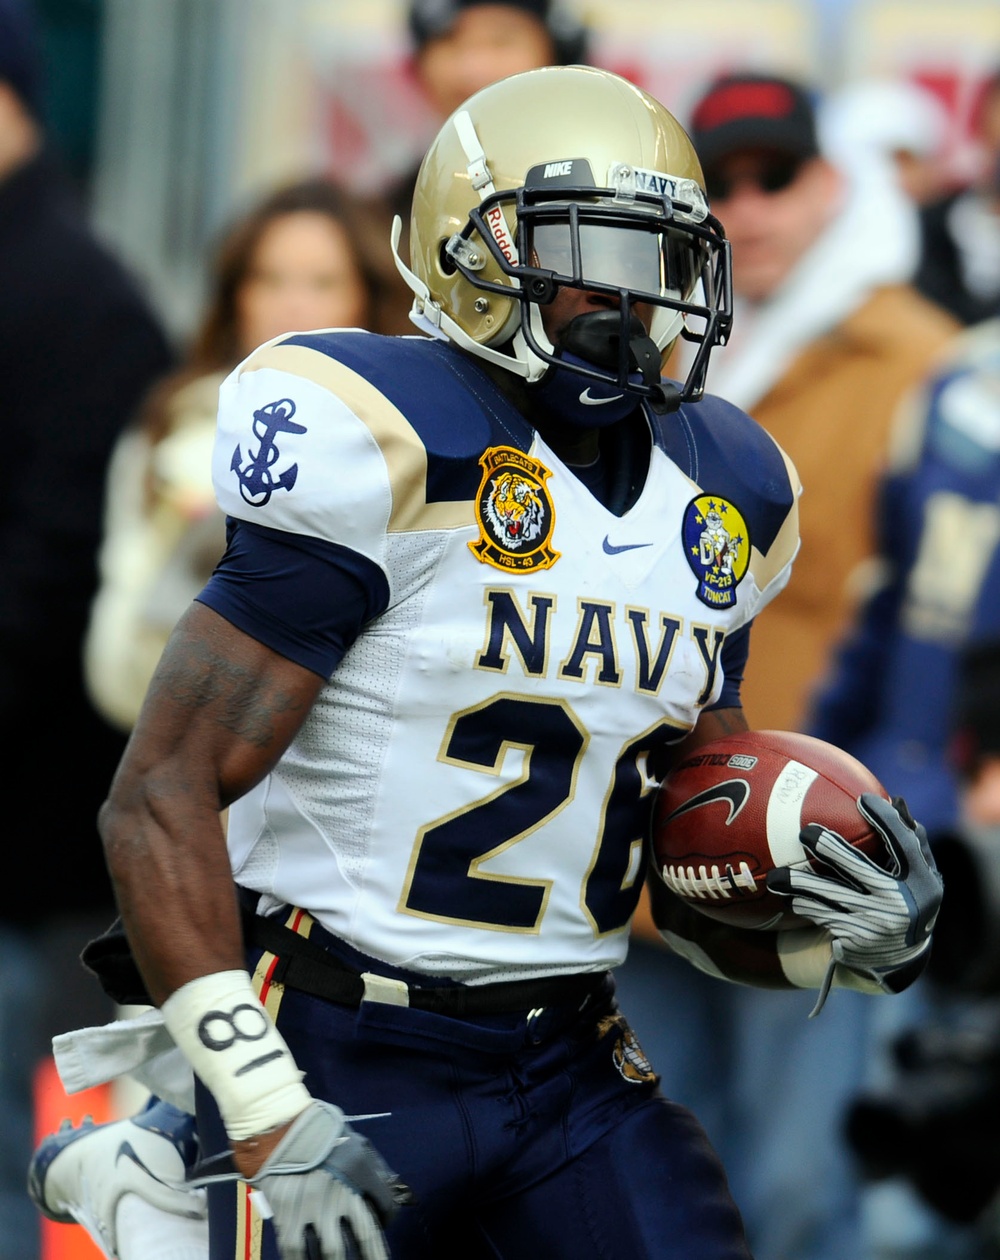 Navy runs away with it during Army-Navy game